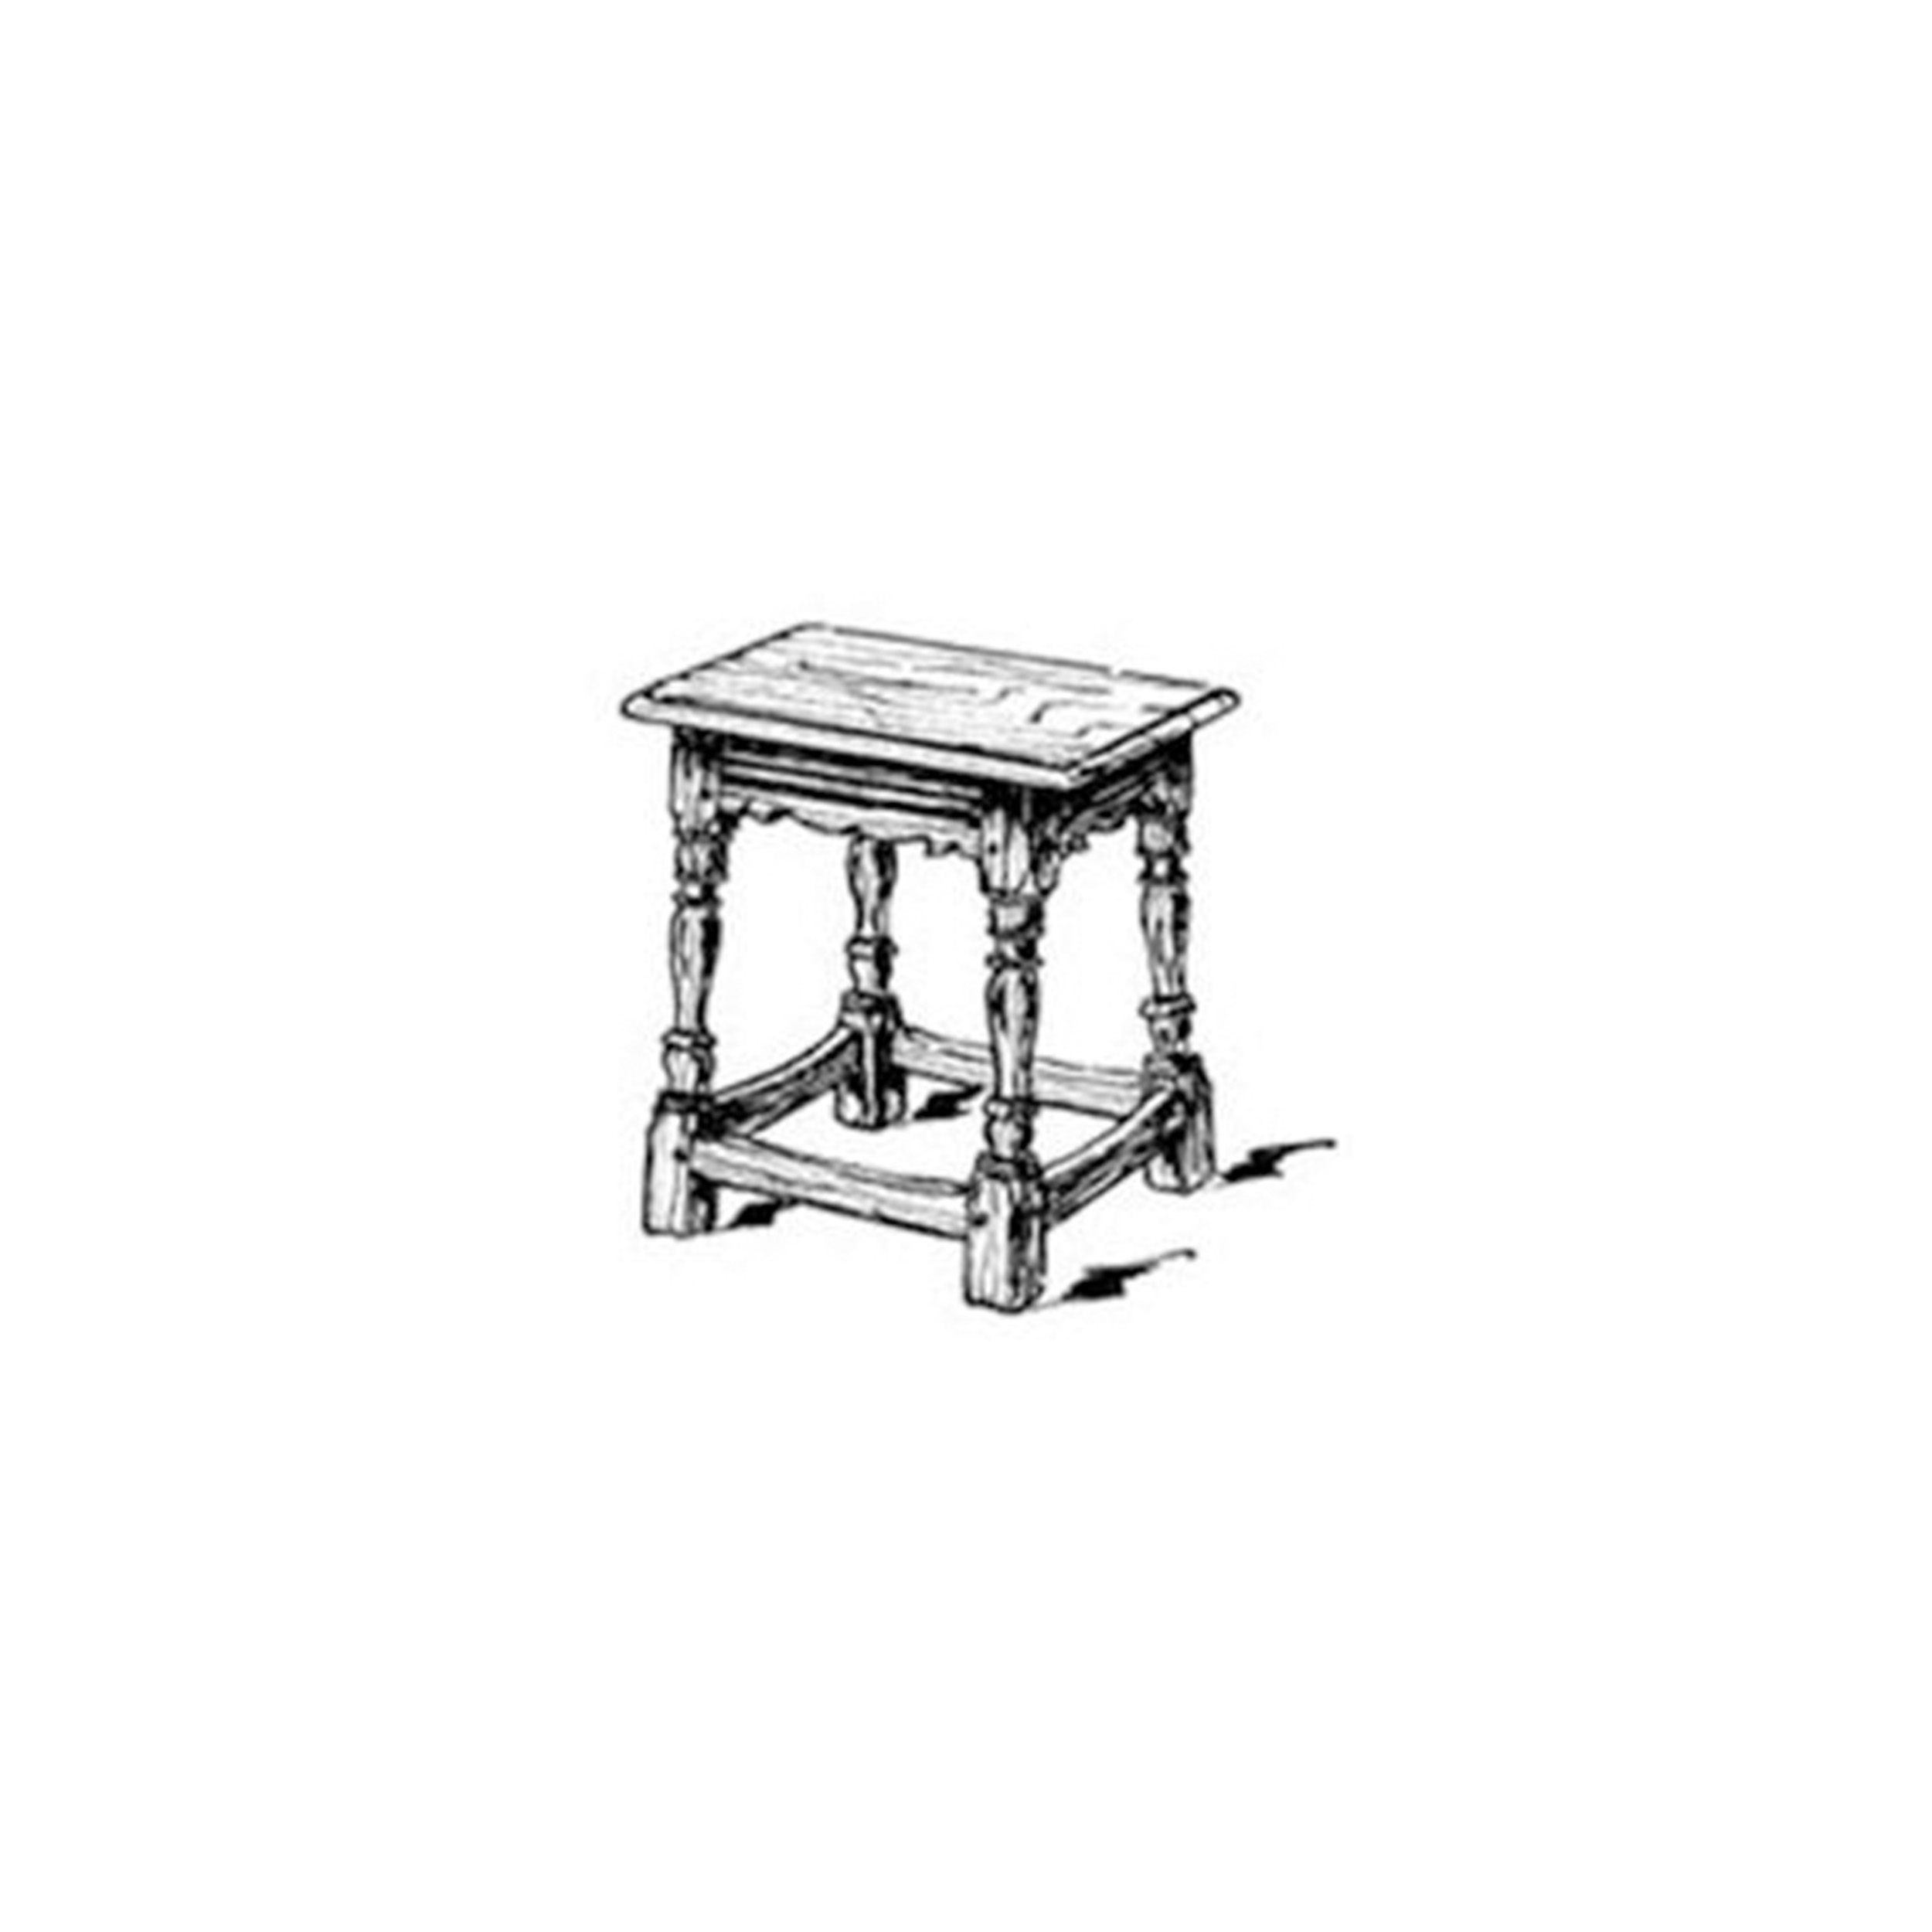 Woodworking Project Paper Plan To Build English Joint Stool Plan No.2